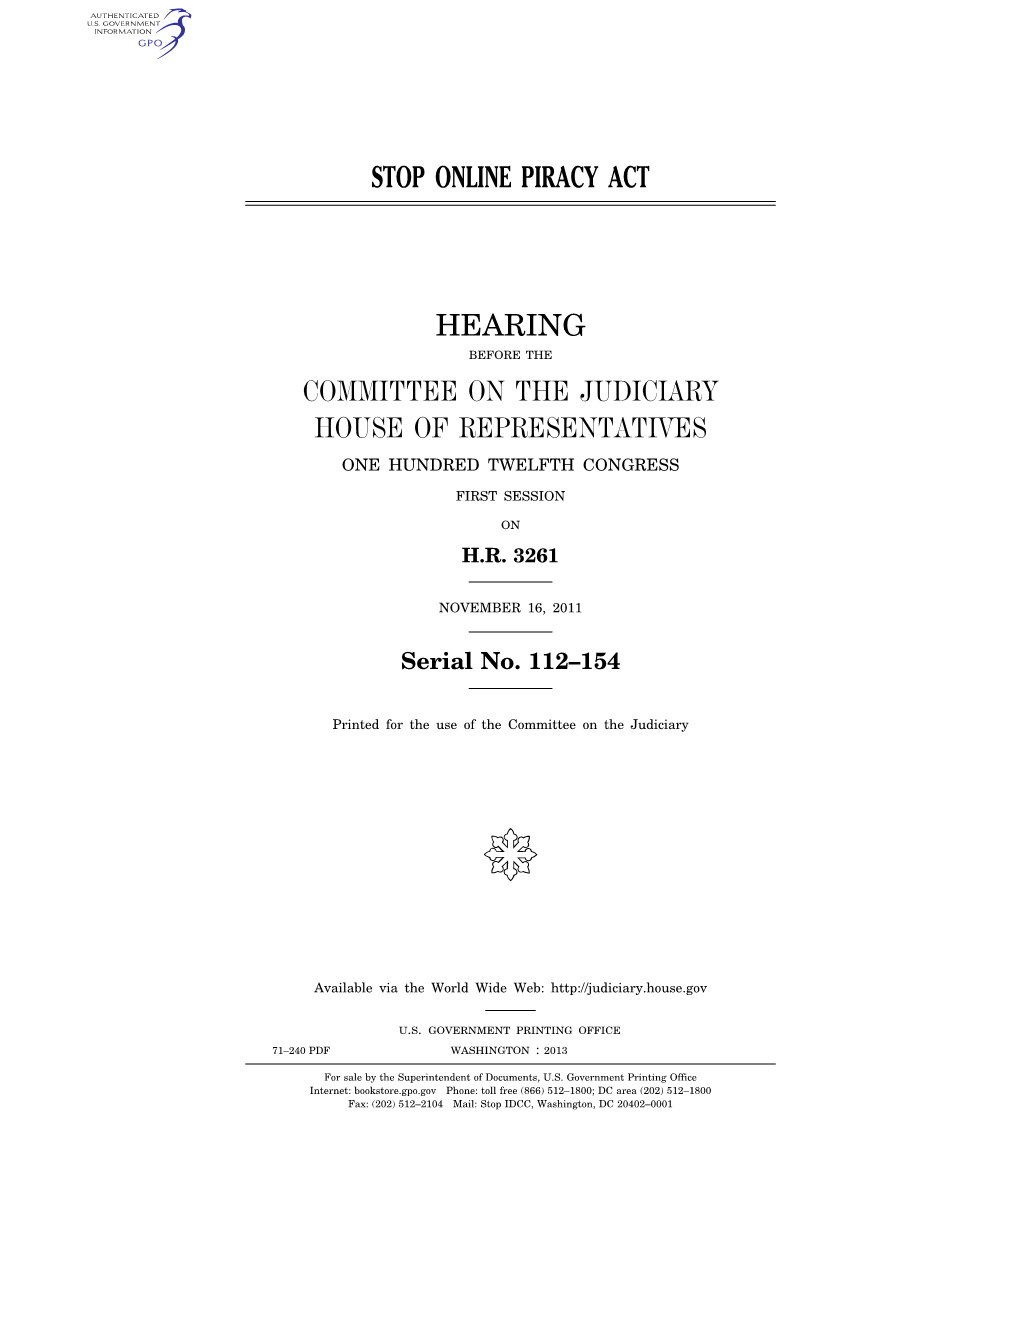 Stop Online Piracy Act Hearing Committee on The